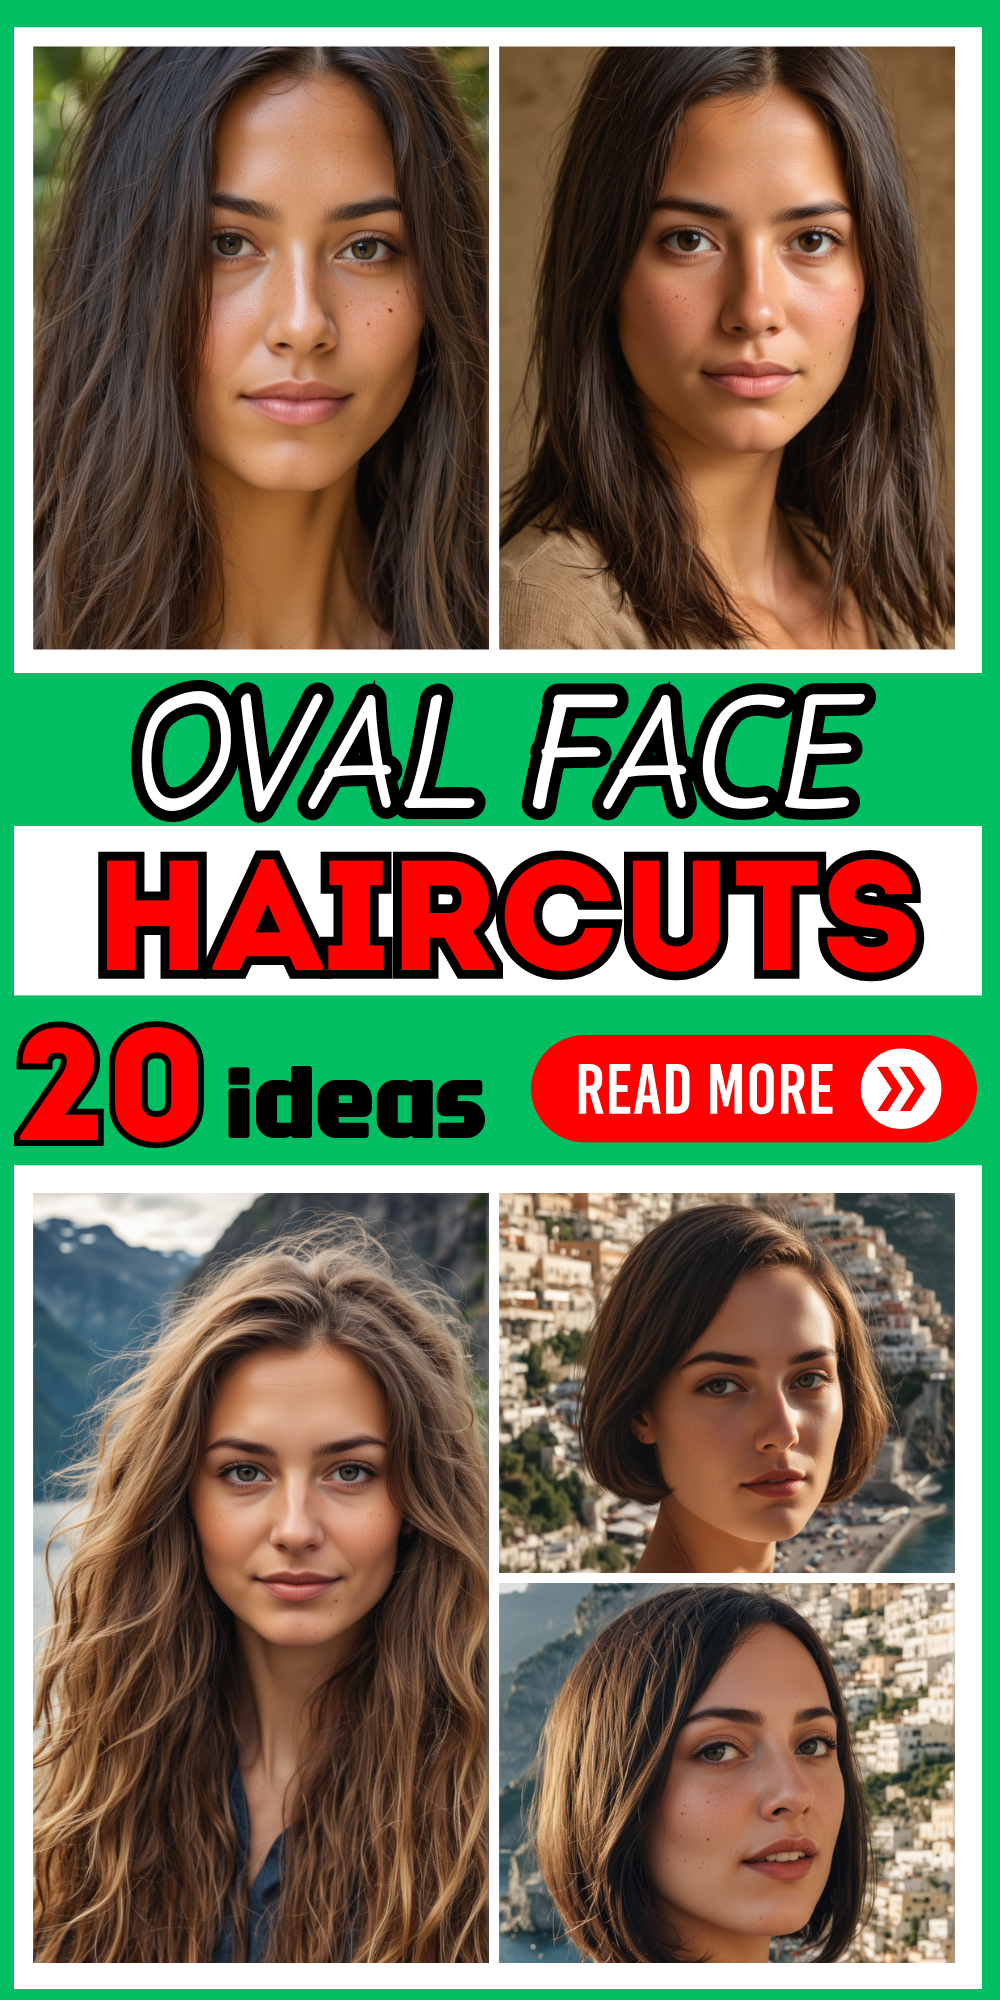 20 Top Flattering Oval Face Haircuts for Every Length